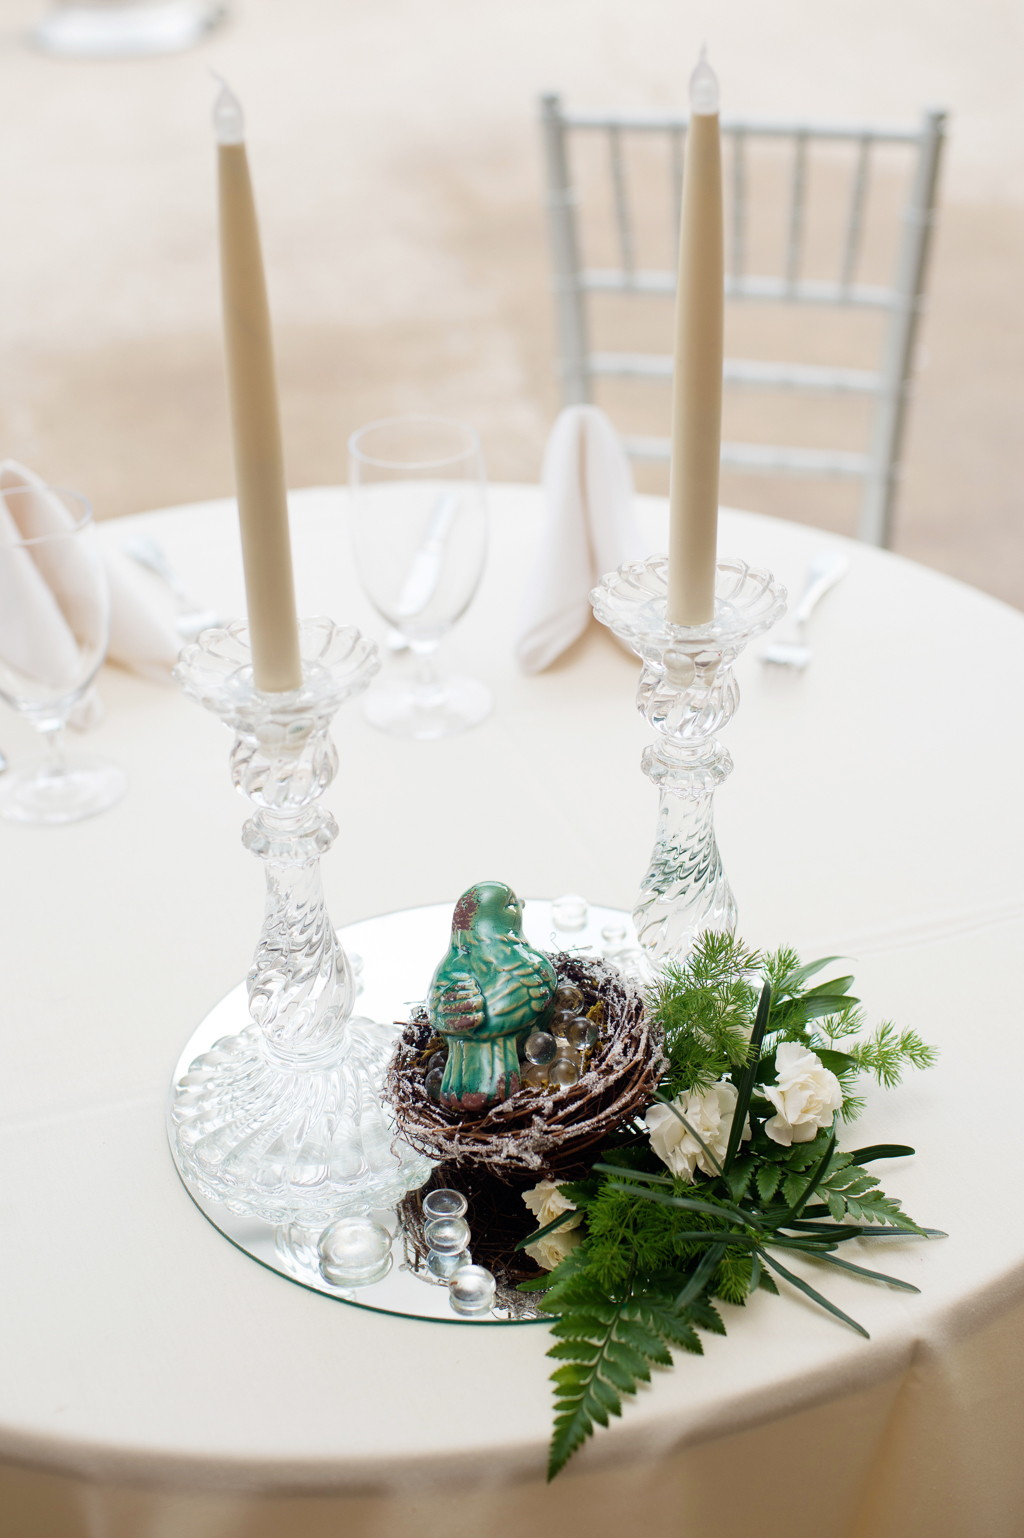 ferns and porcelain bird in a nest decorate a wedding reception table